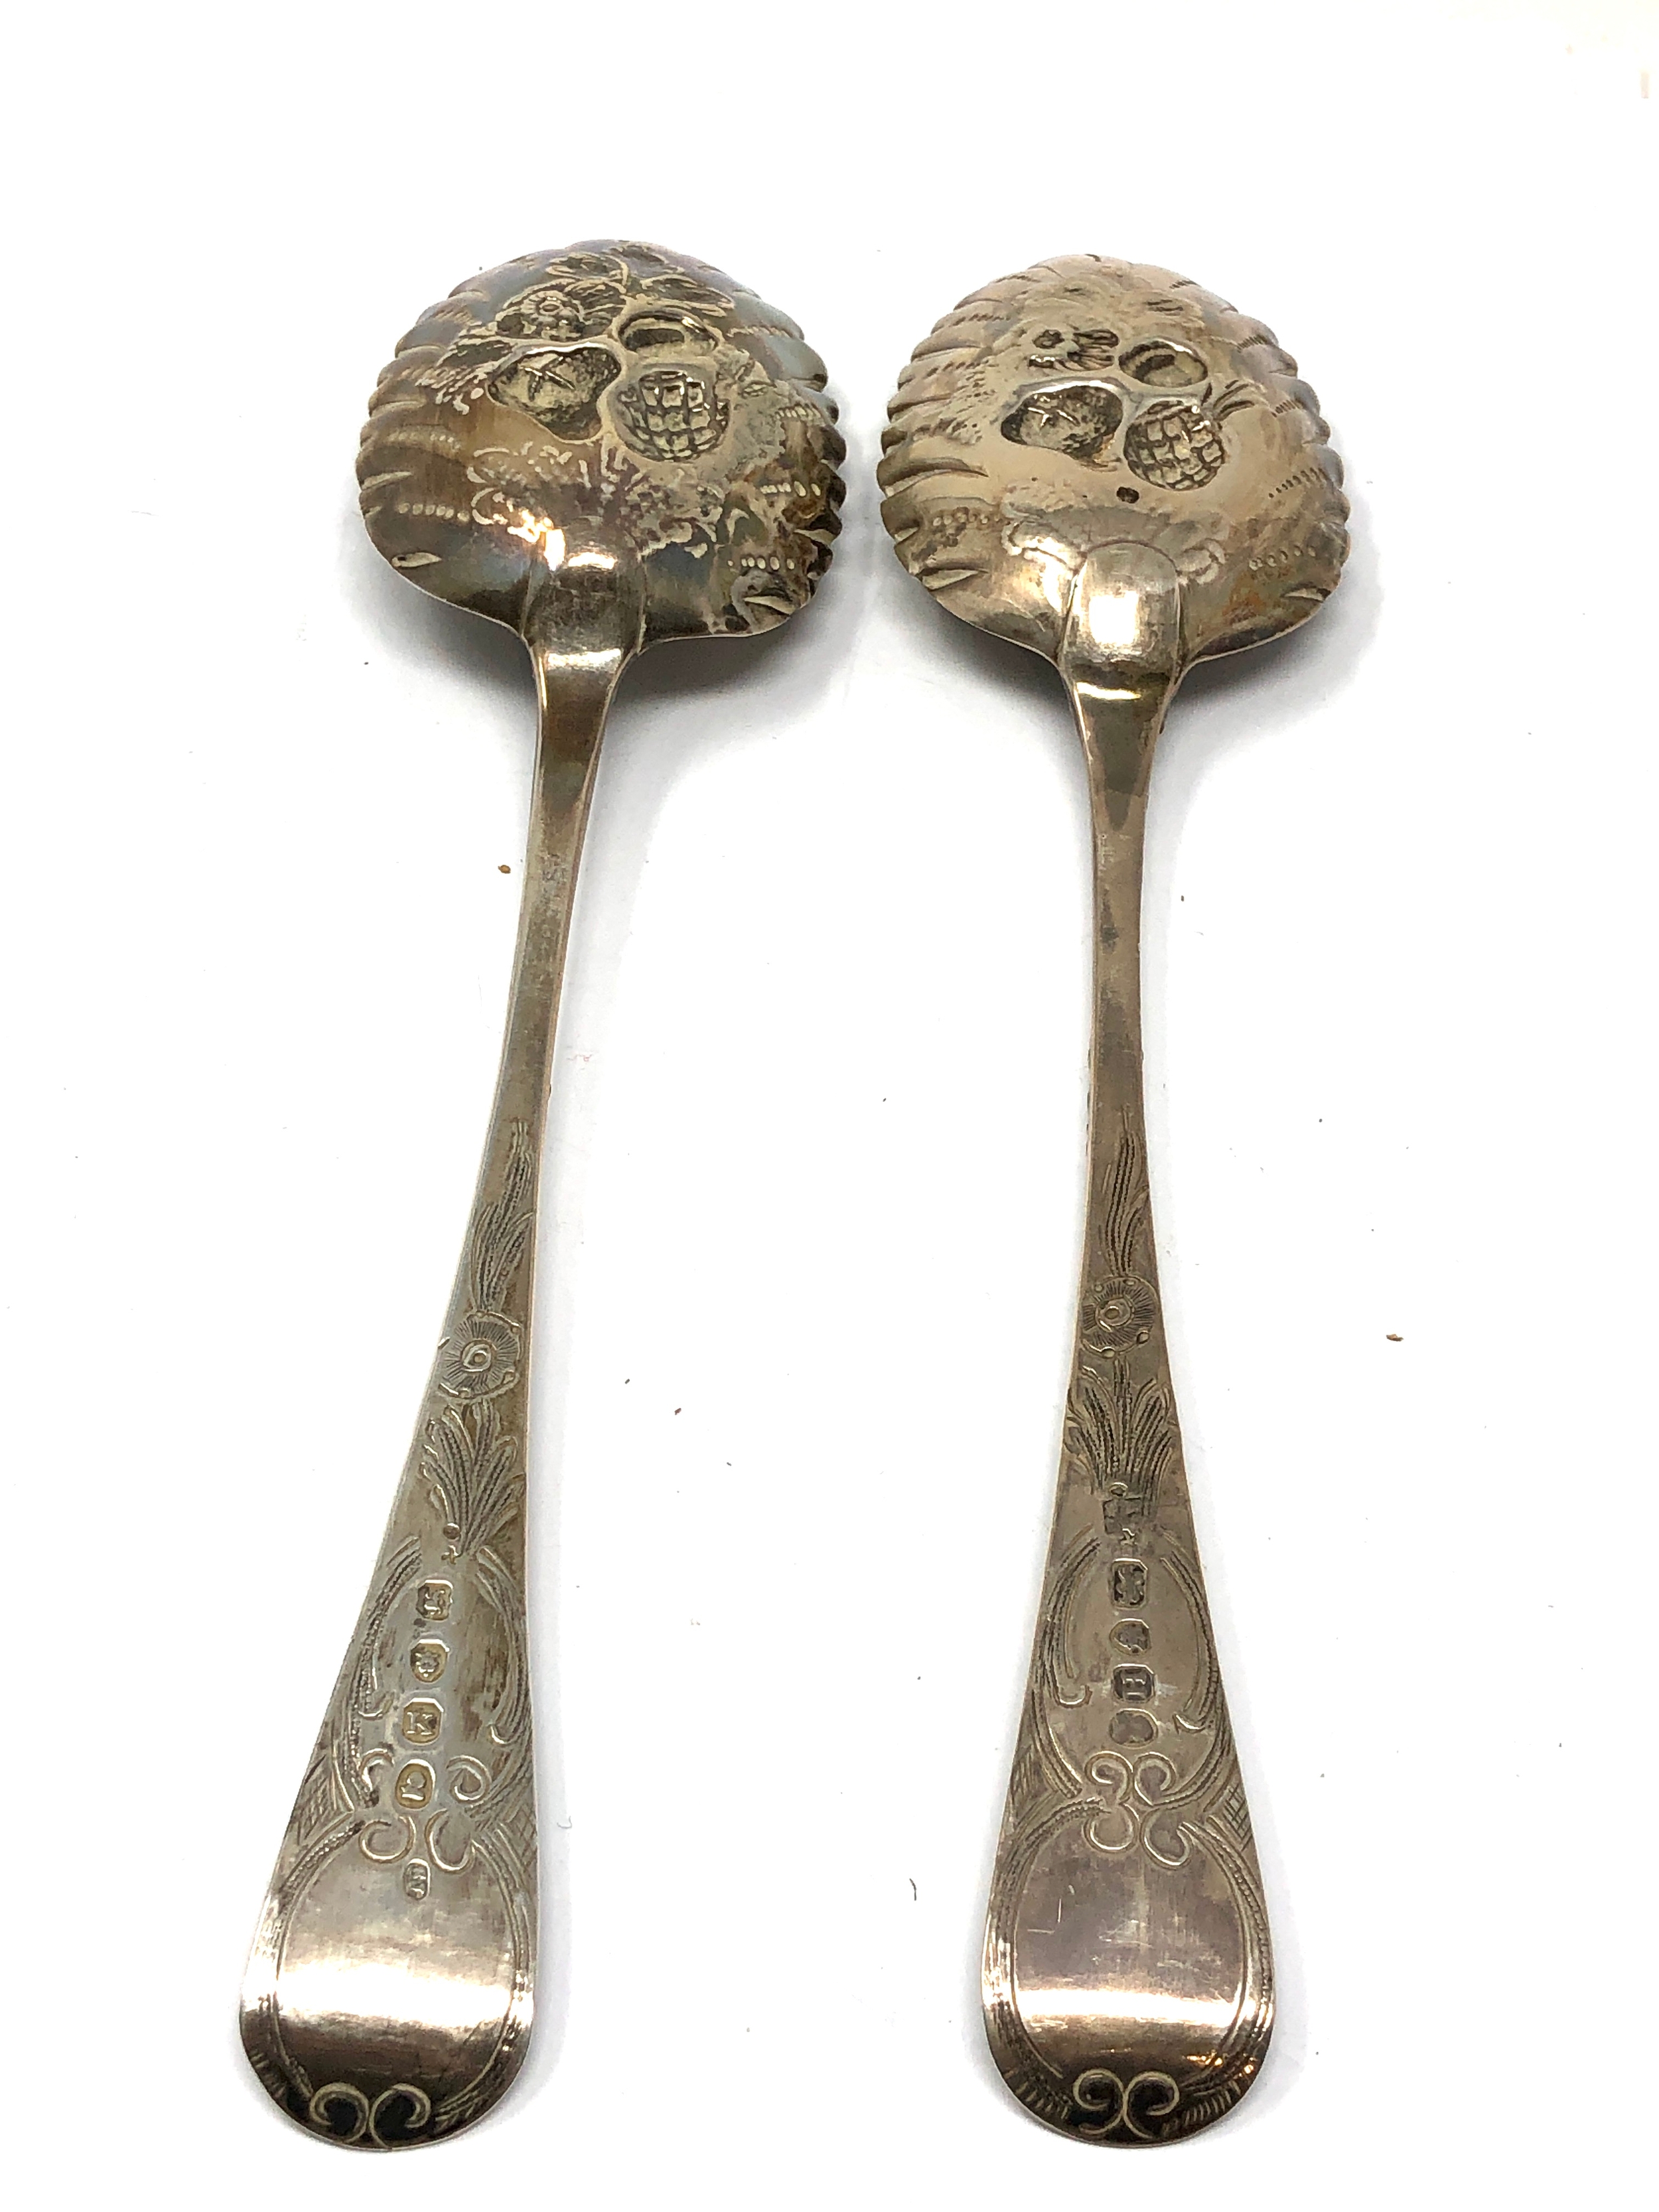 Pair of georgian silver berry serving spoons London silver hallmarks weight 104g - Image 3 of 4